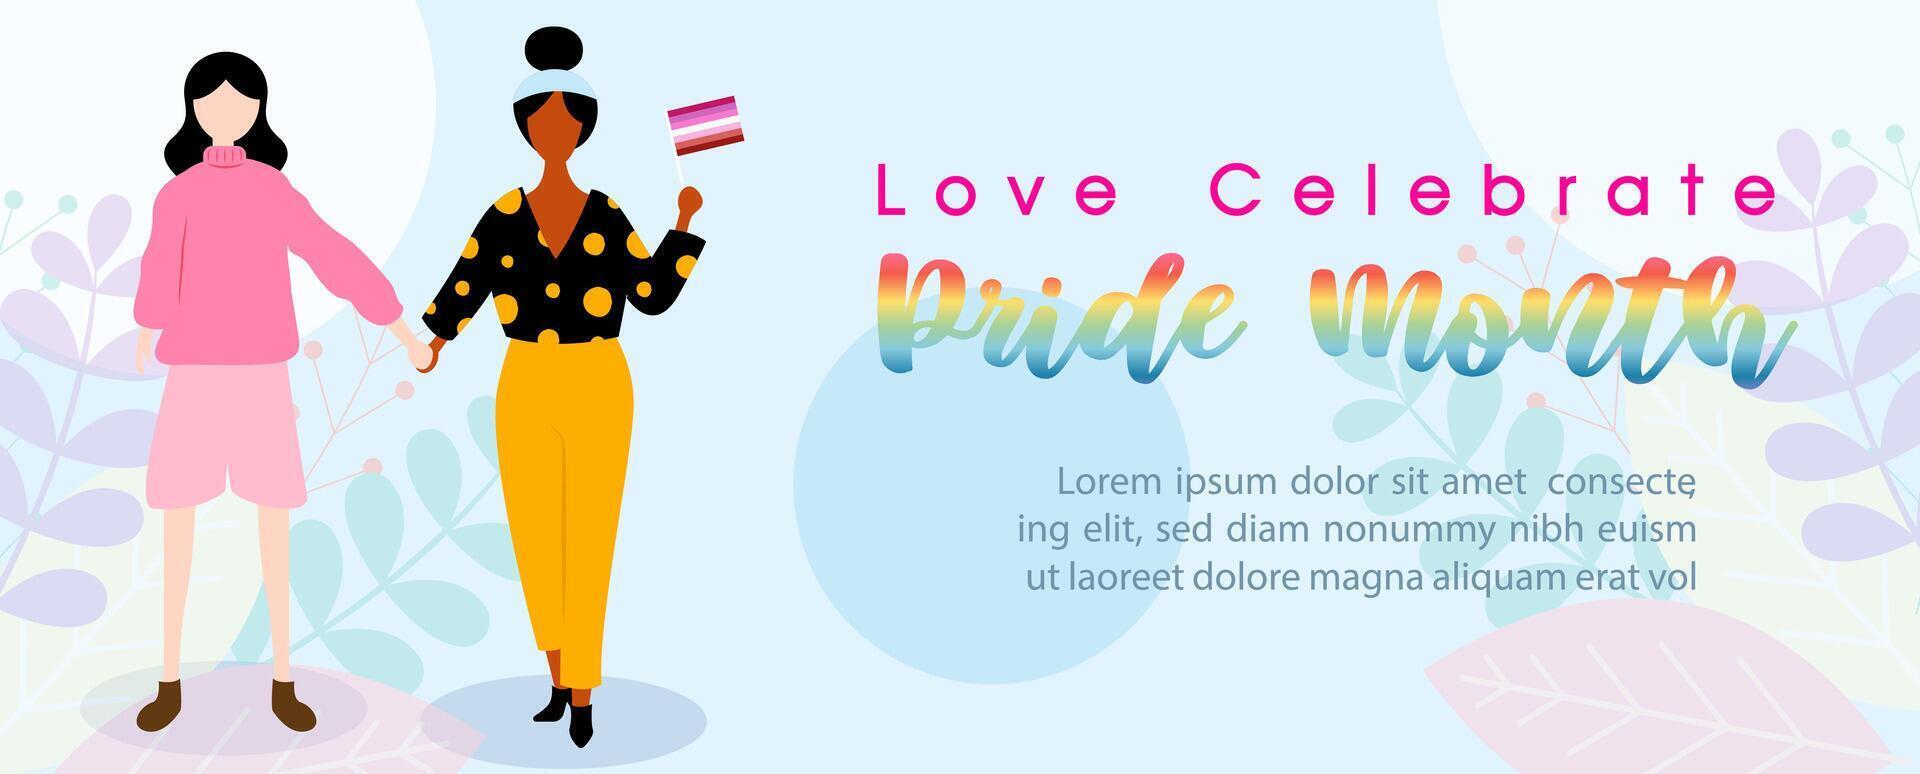 Lesbian couple with rainbow pride month letters and example texts, Poster of LGBT Pride month in vector design